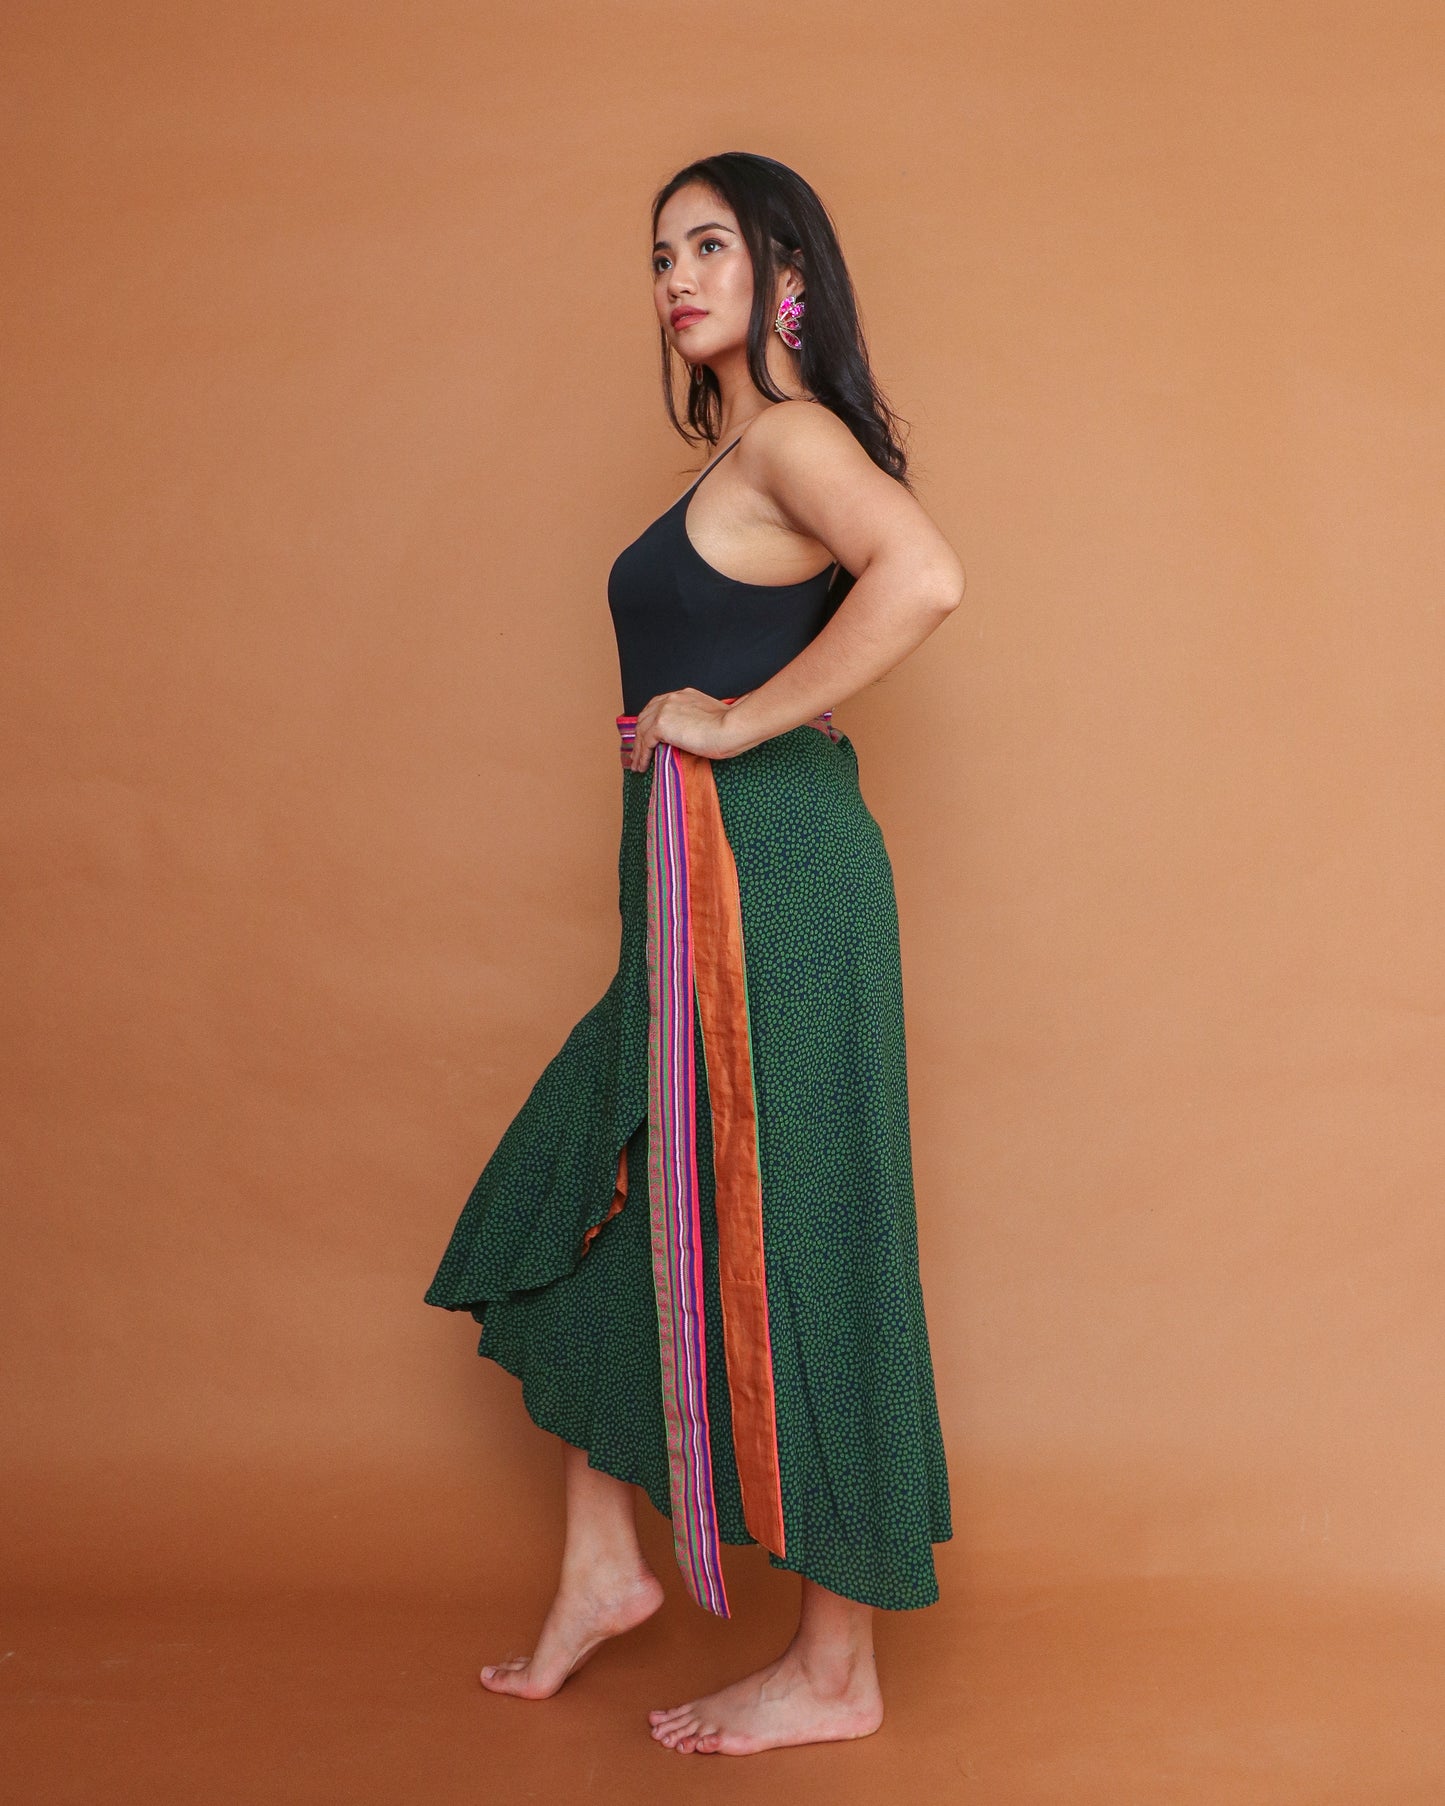 Bretman Wrap Skirt in Green Orange with Hand Embroidery